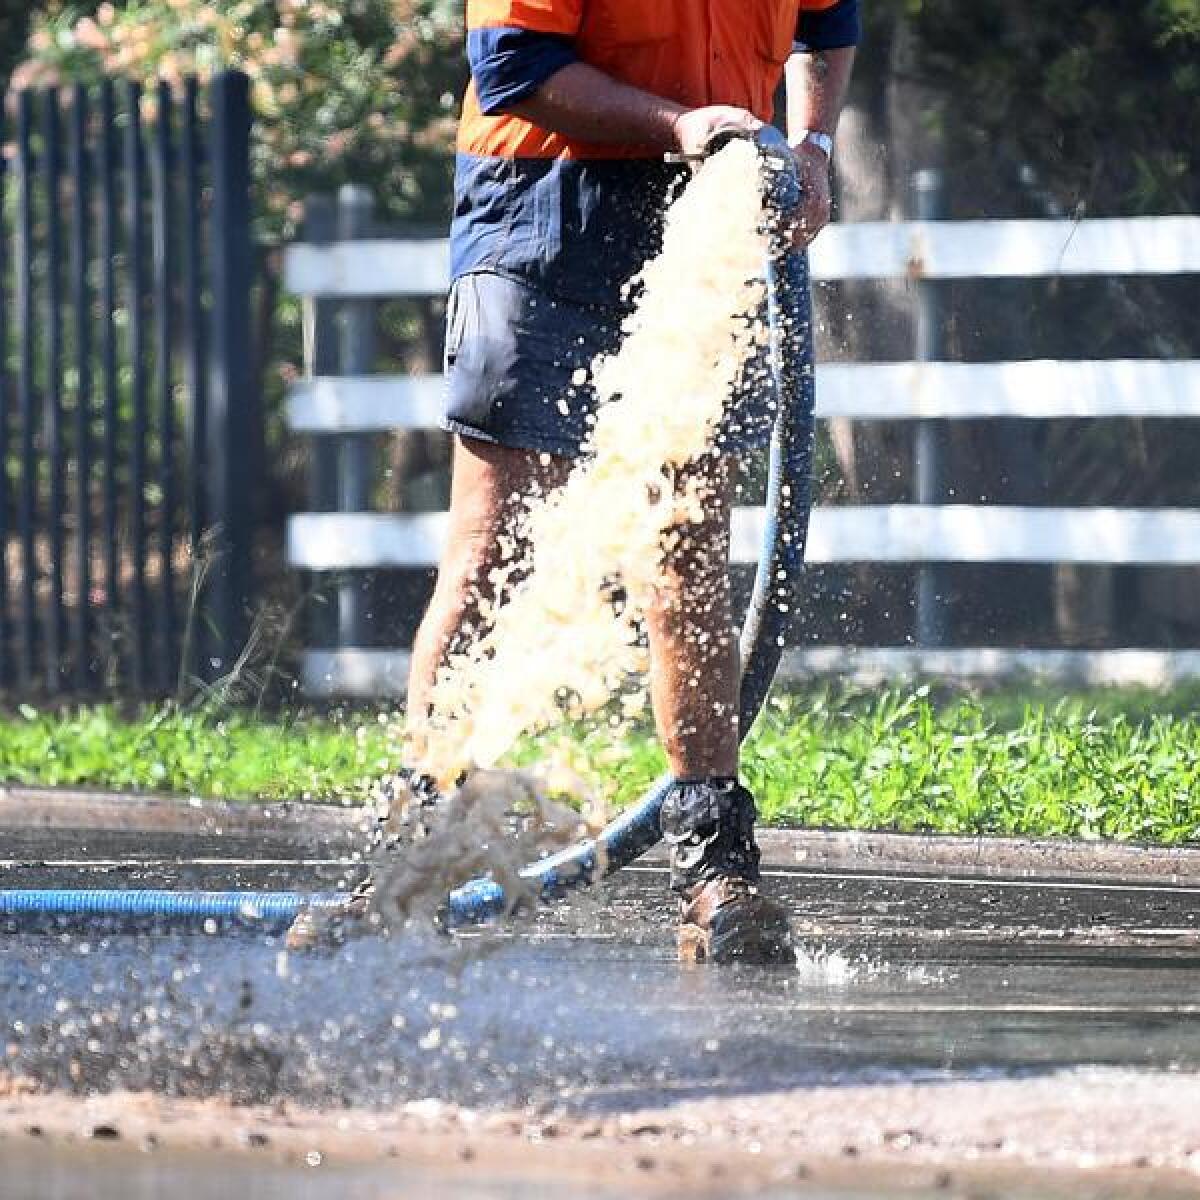 Generic photo of council worker washing mud off a road